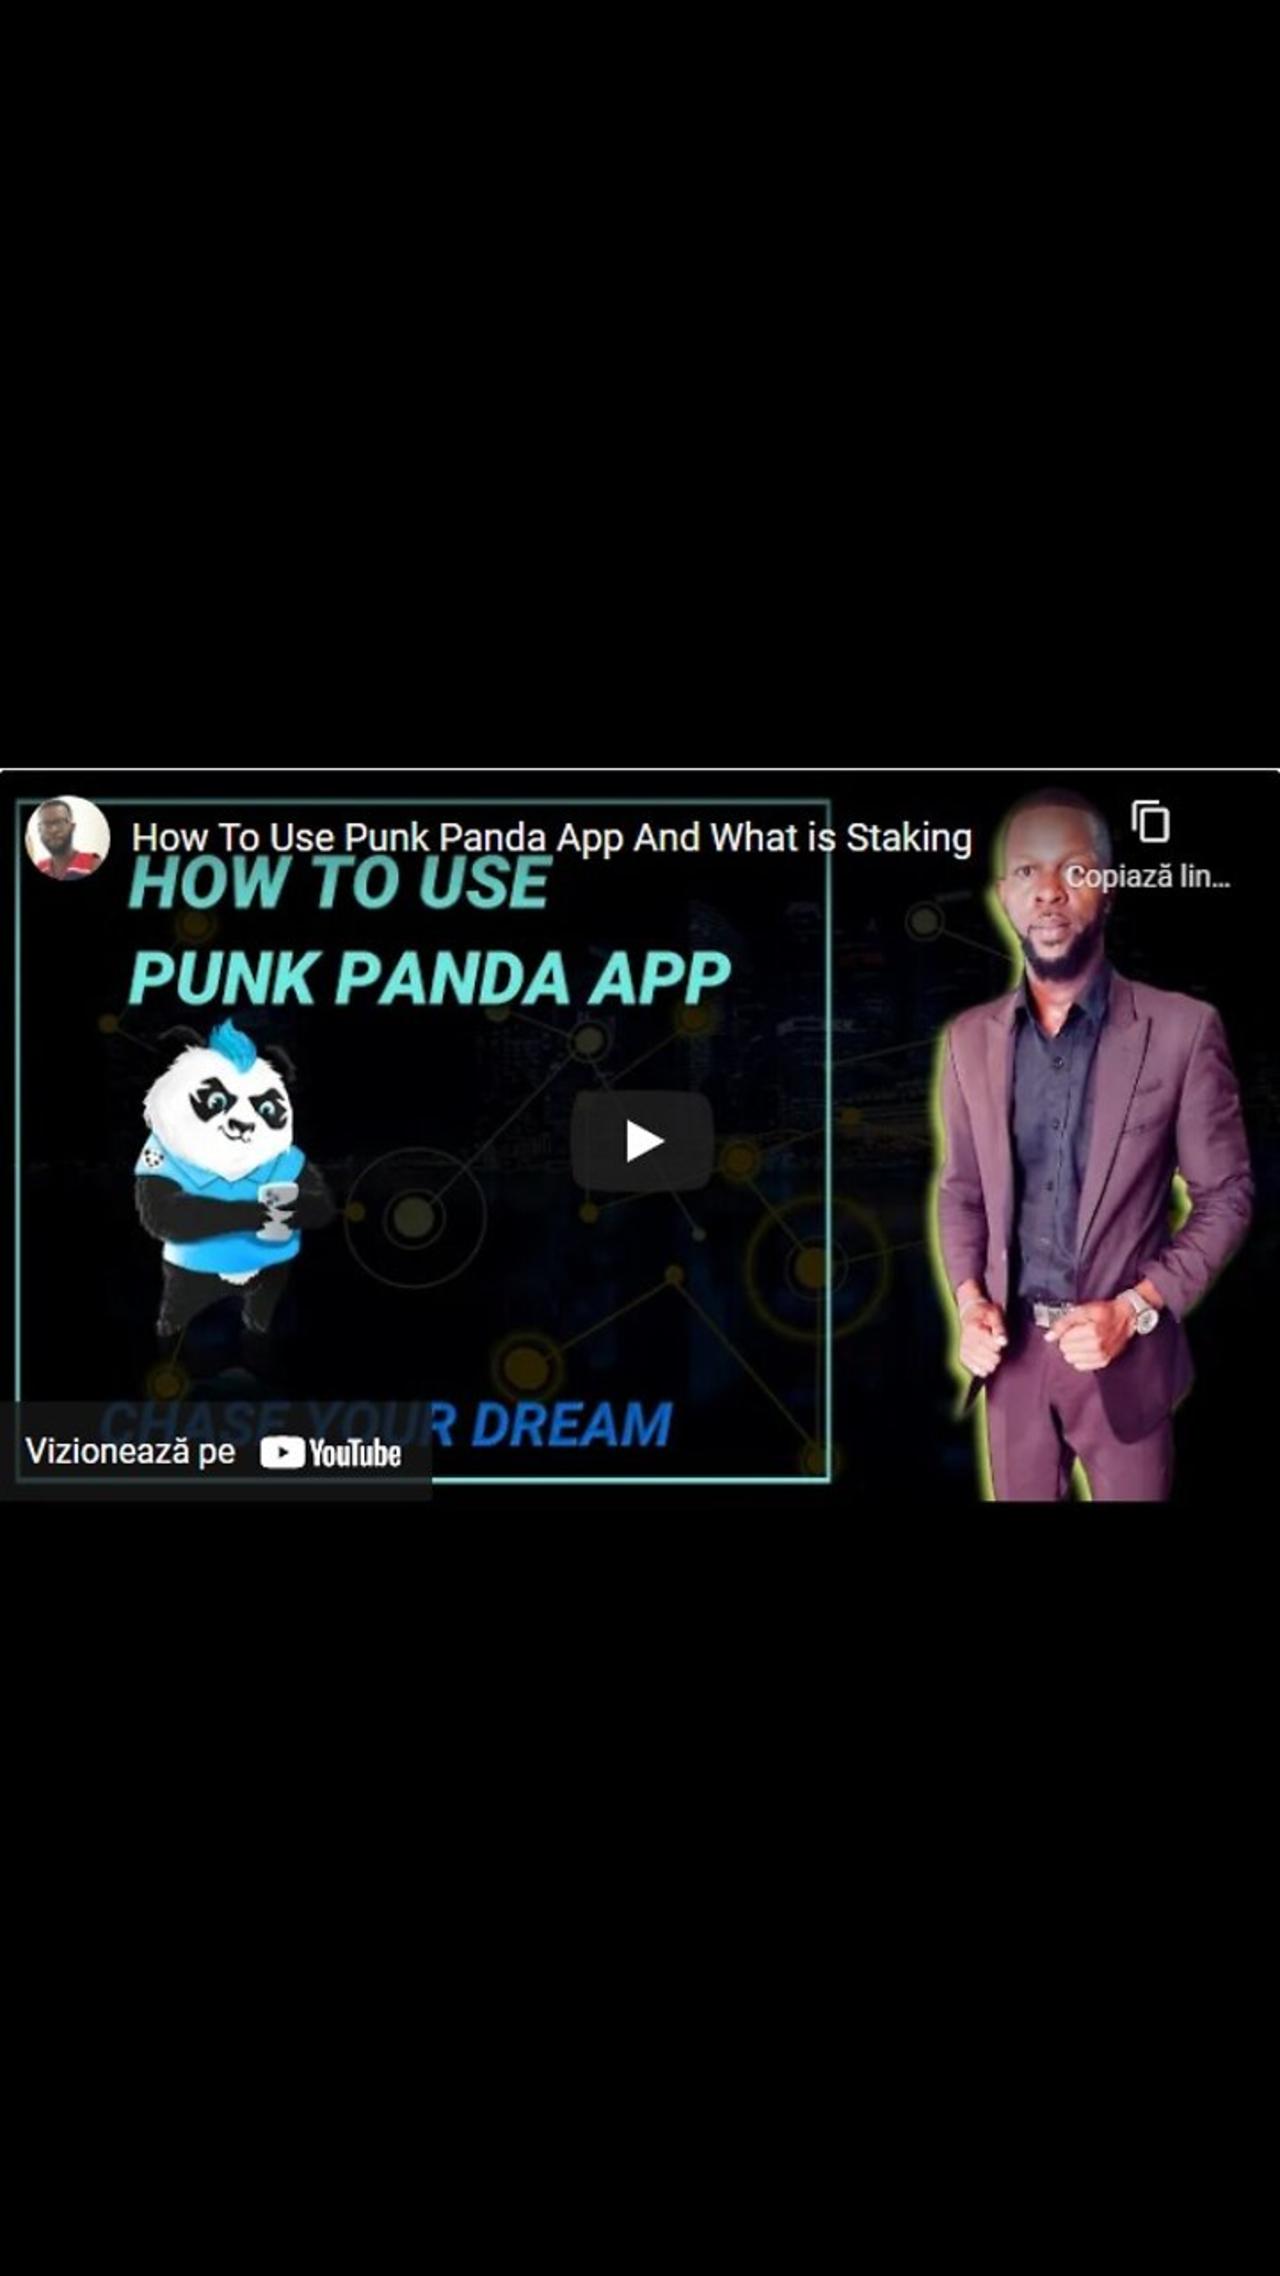 How To Use Punk Panda App And What is Staking